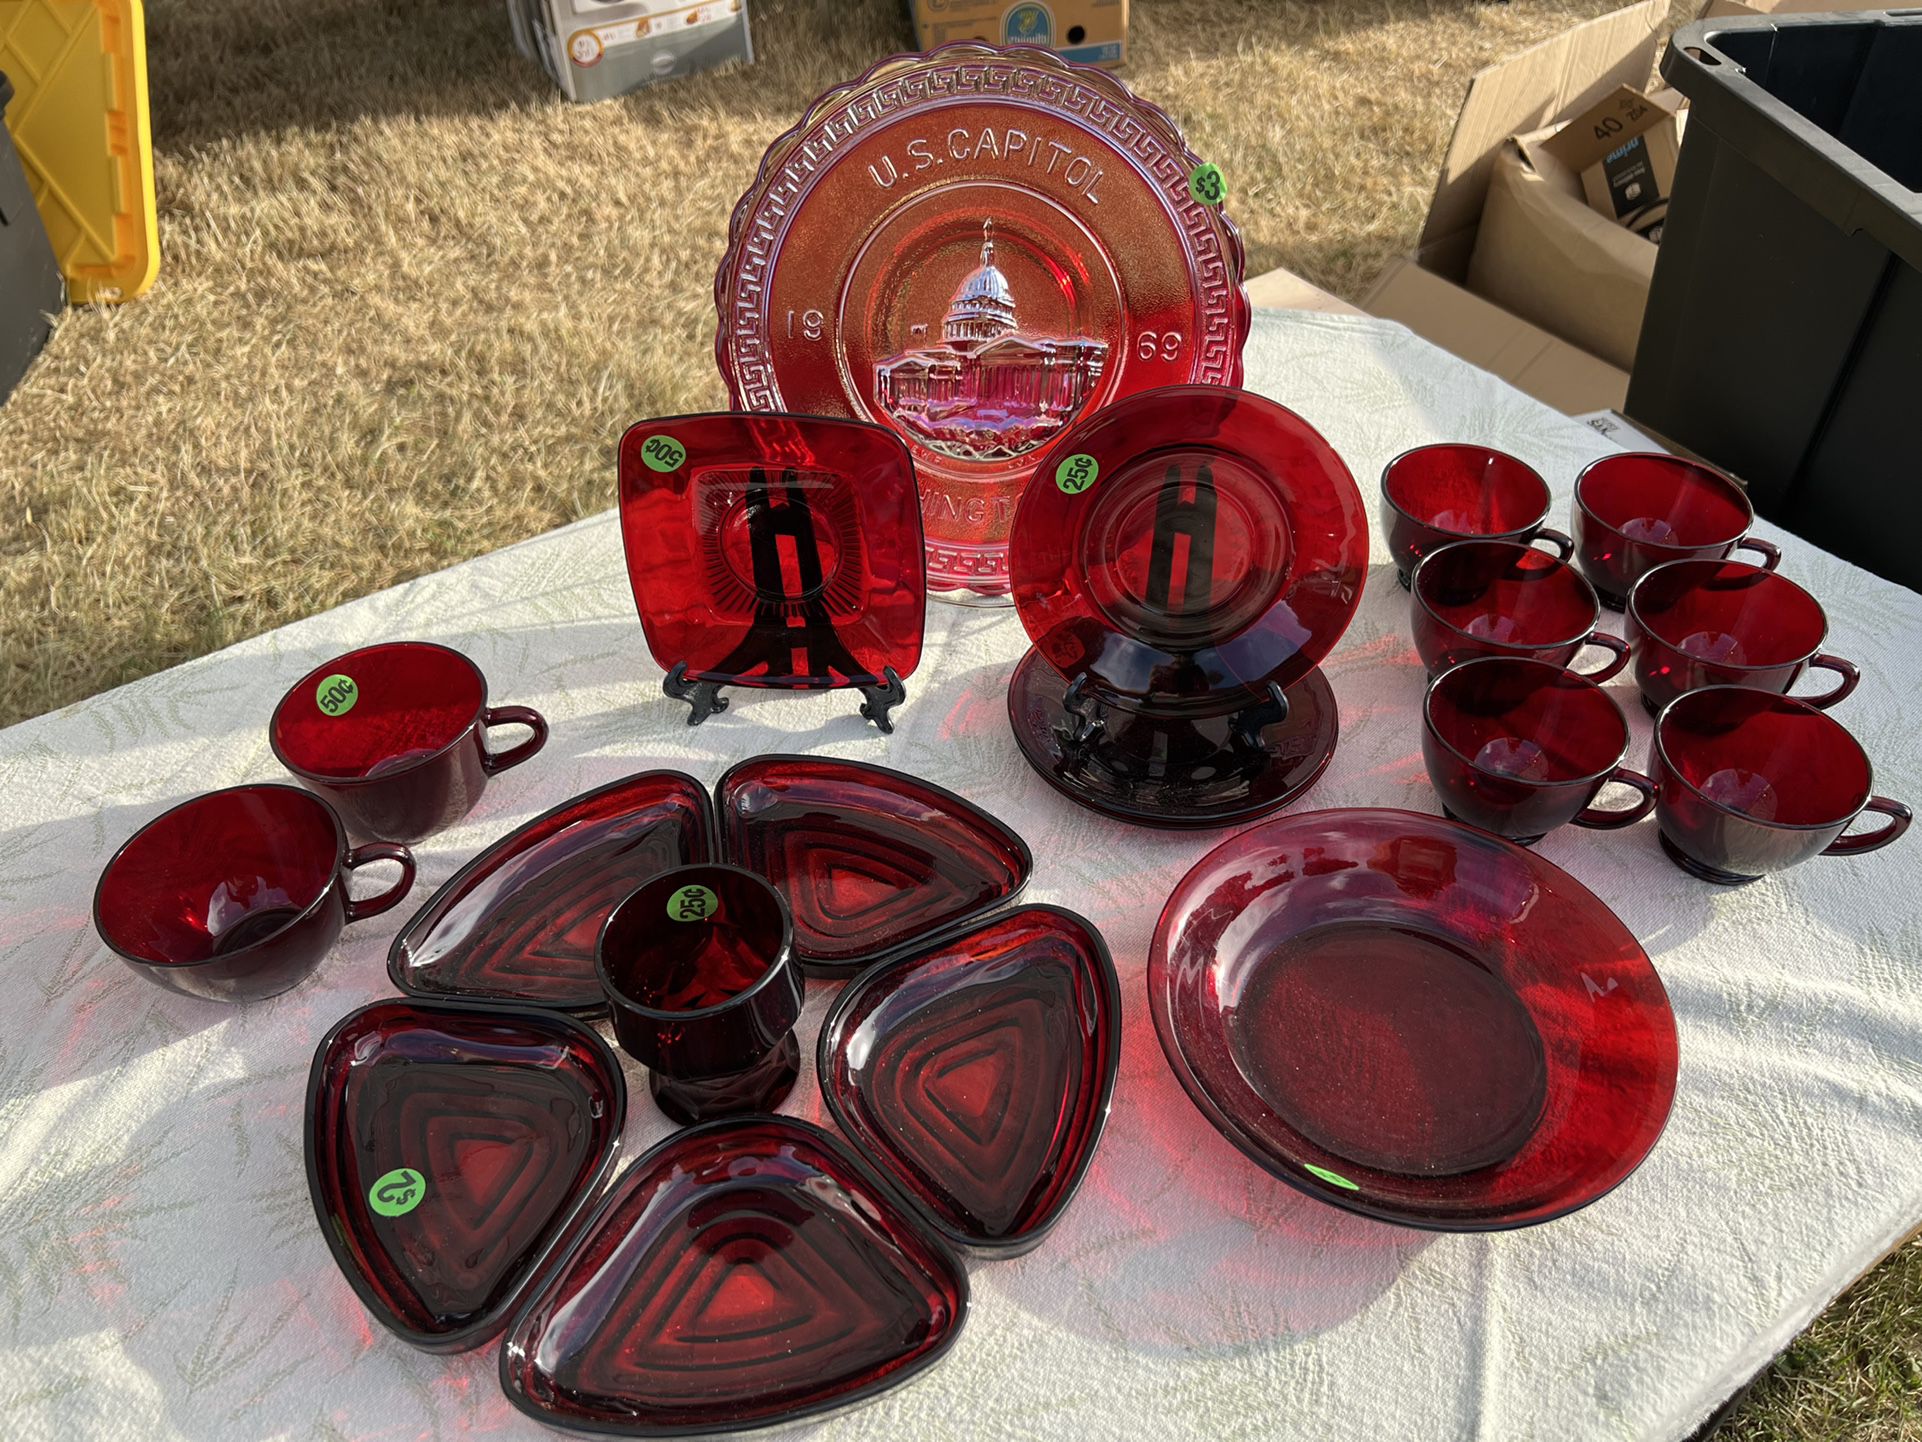 Red Carnival & Mid Century Anchor Hocking & Libby Glass